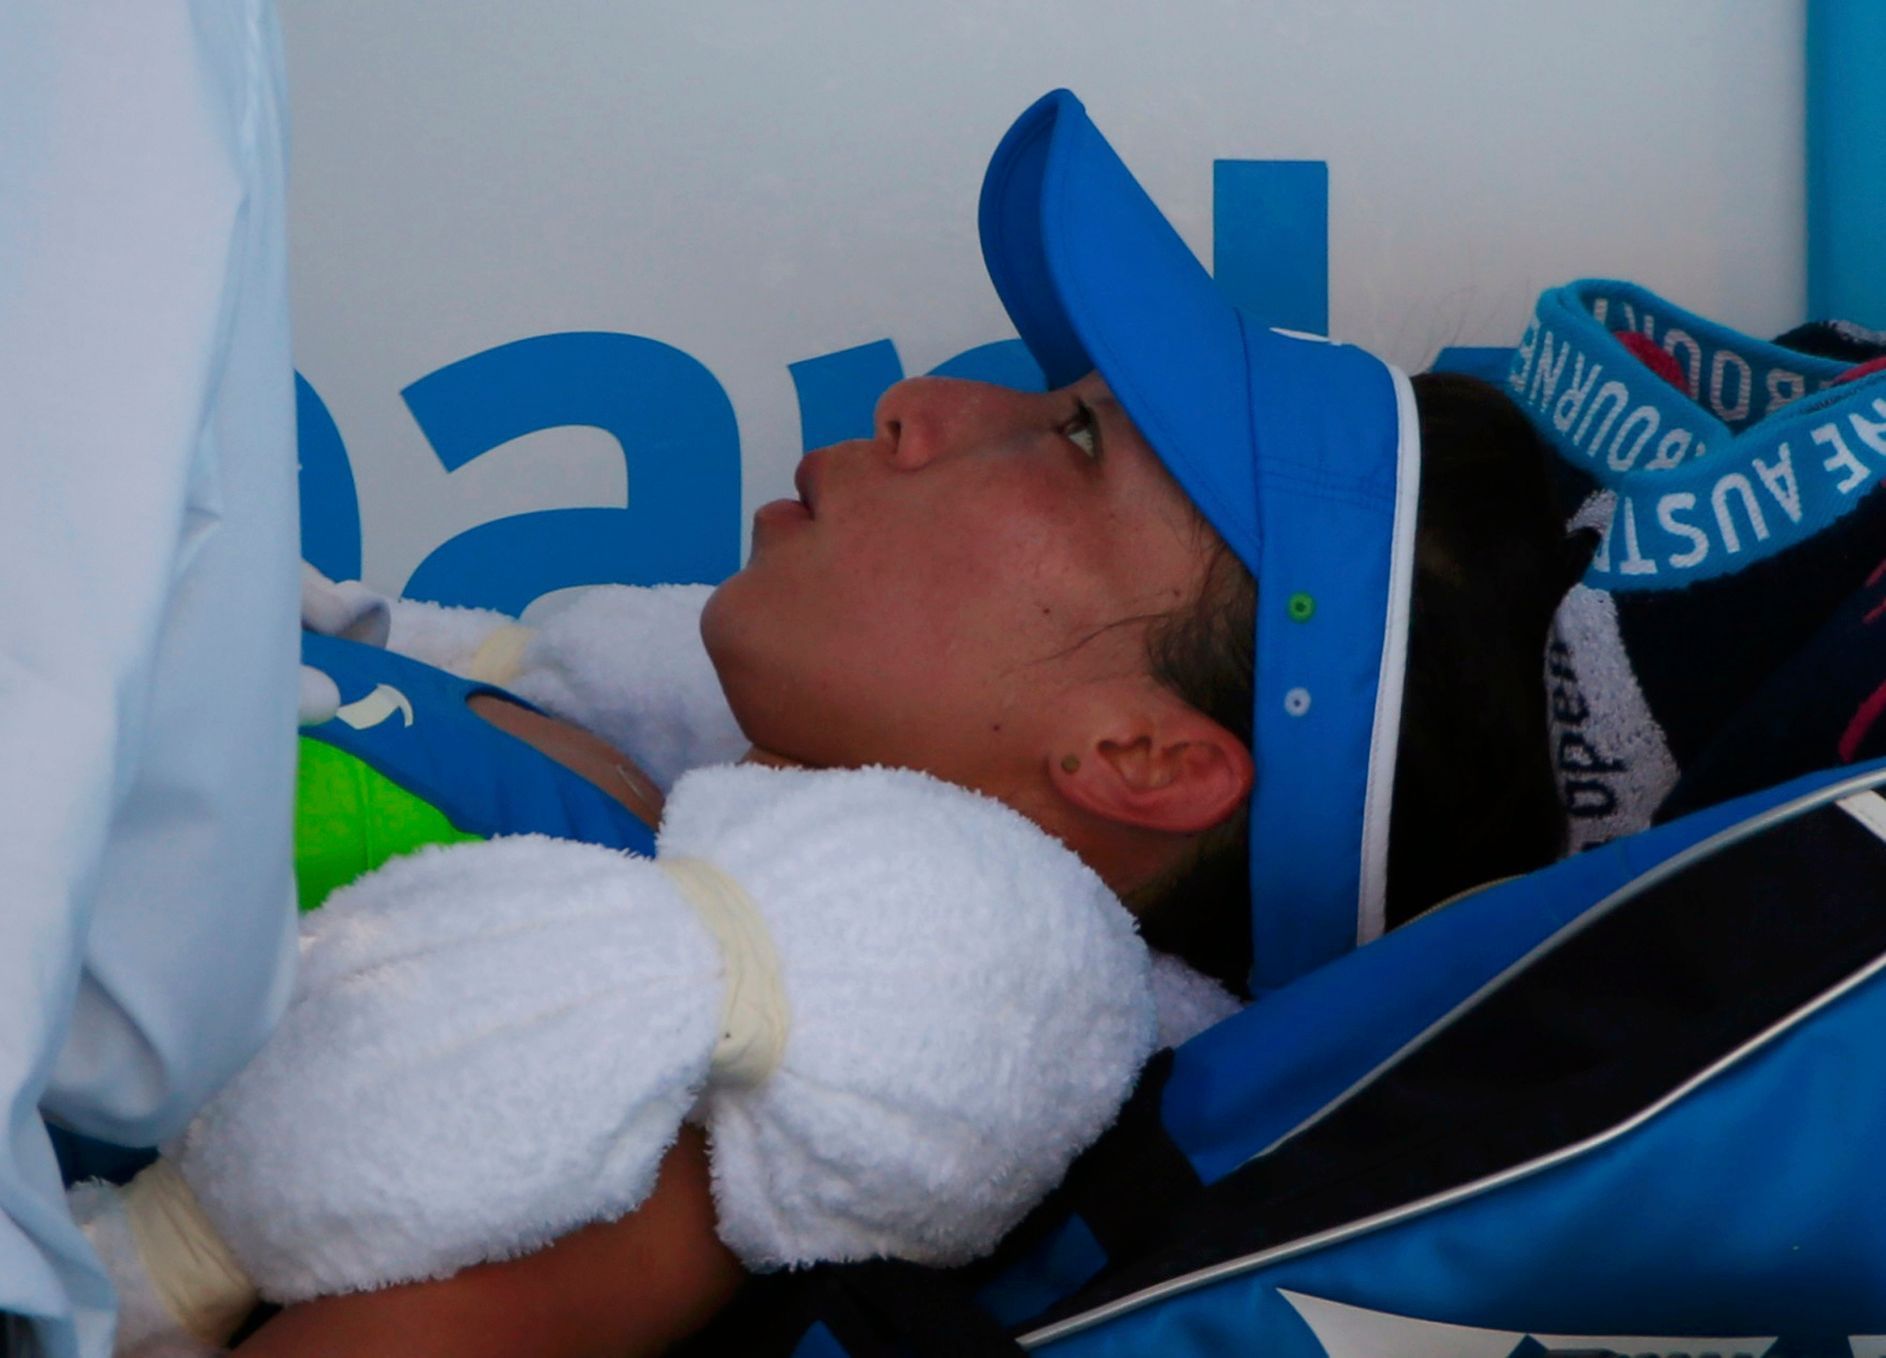 Zheng Jie of China rests on a bench during a medical timeout during her women's singles match against Casey Dellacqua of Australia at the Australian Open 2014 tennis tournament in Melbourne